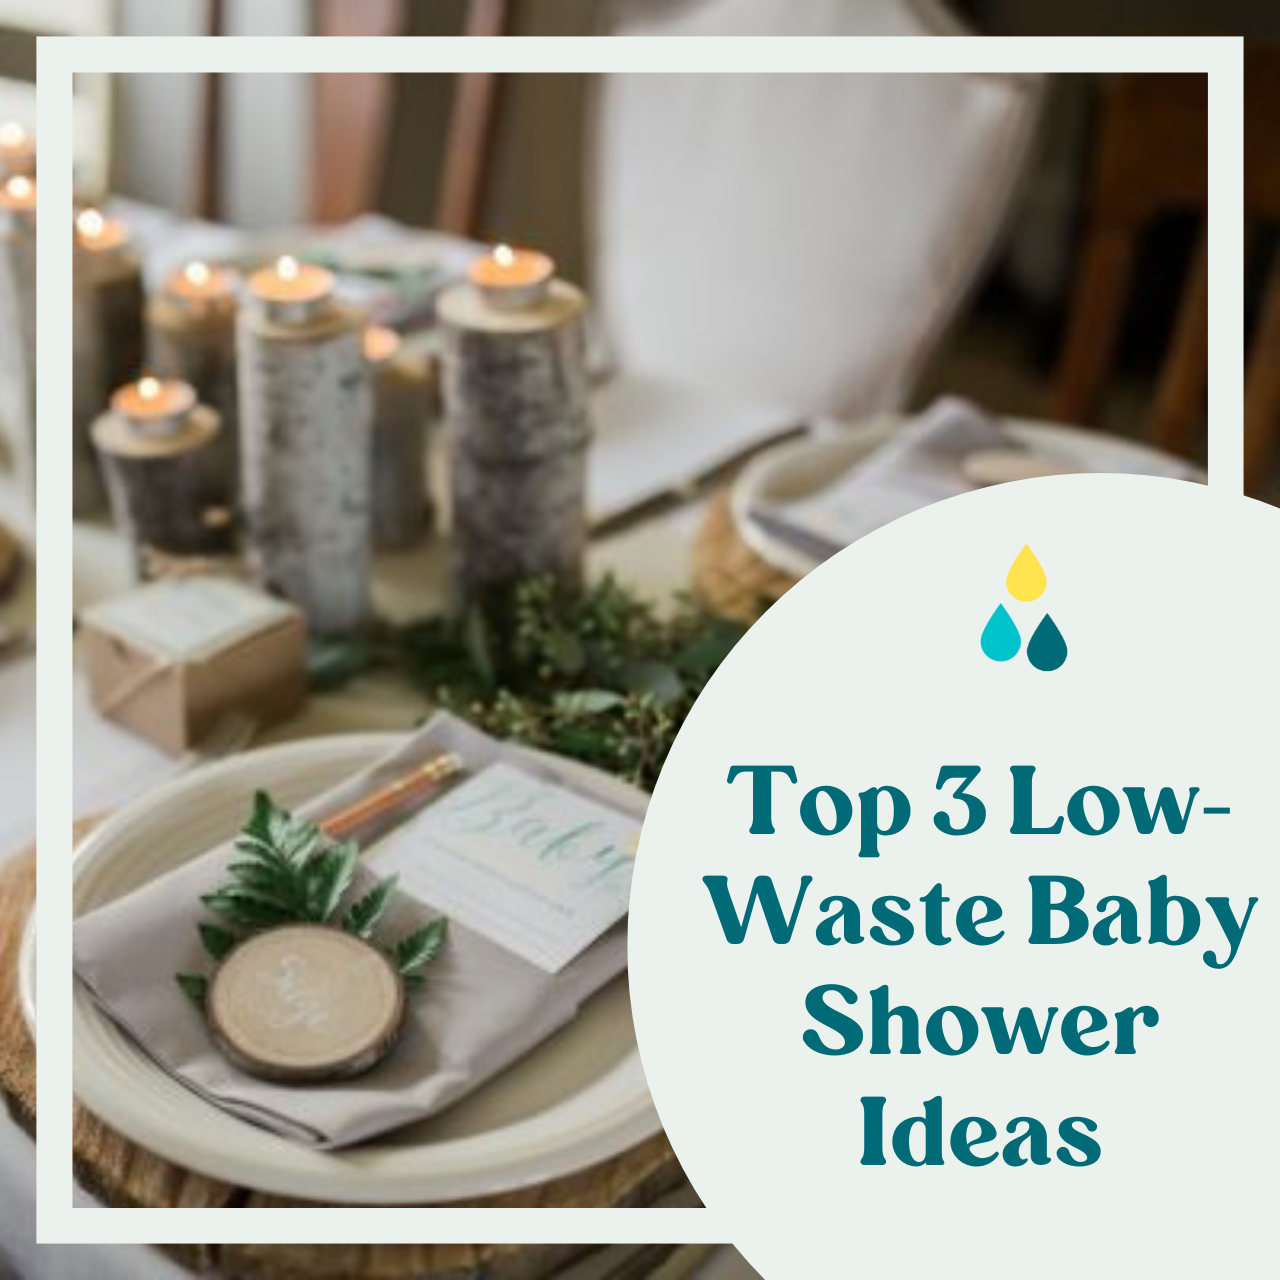 Top 3 Must-Haves for a Low-Waste Baby Shower